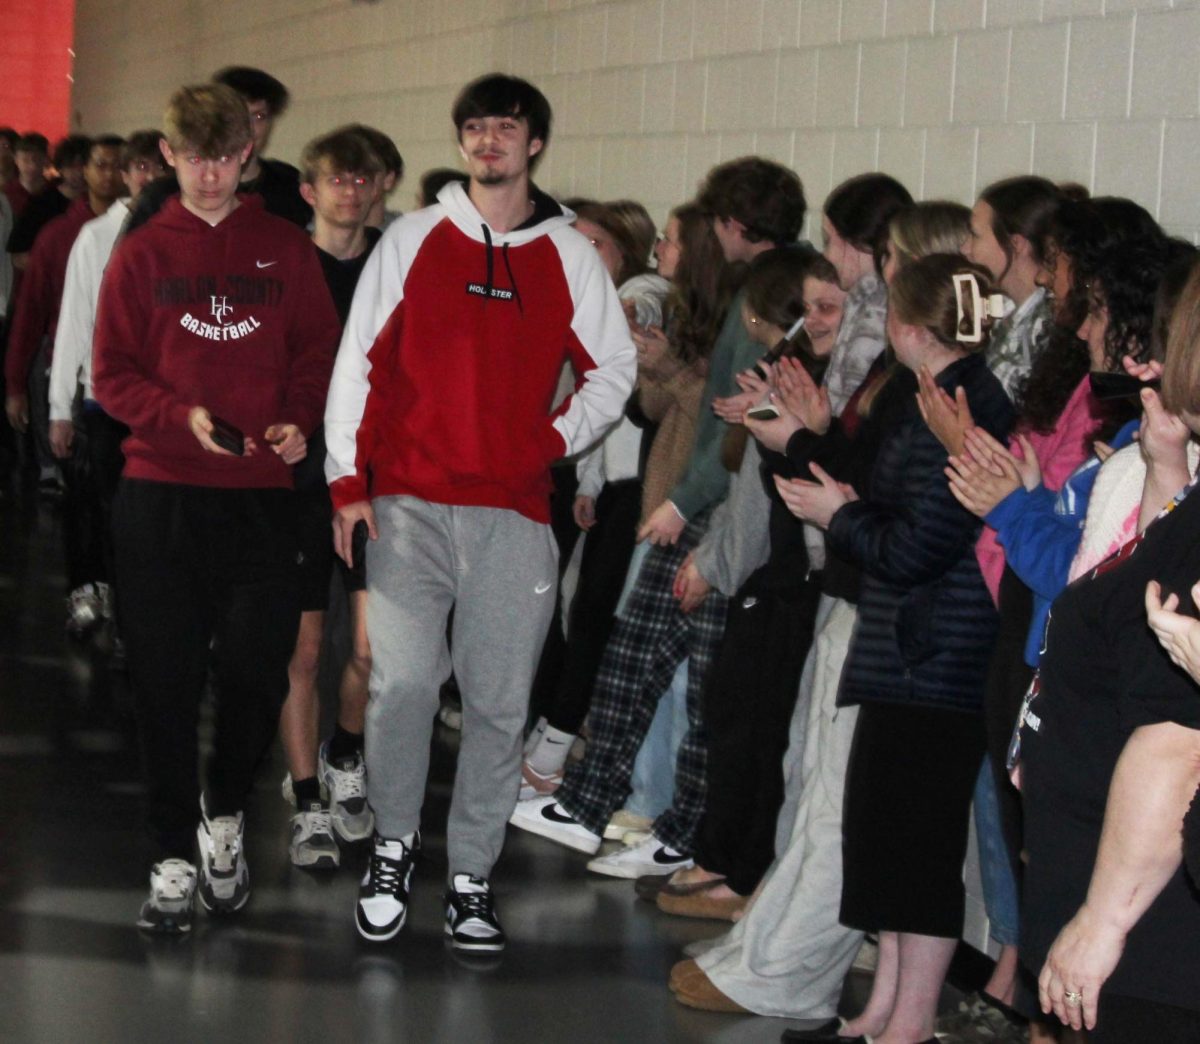 Harlan+County+basketball+players+received+an+enthusiastic+sendoff+to+the+state+tournament+on+Tuesday+as+they+walked+along+the+track+at+the+HCHS+gym+before+leaving+for+Lexington.